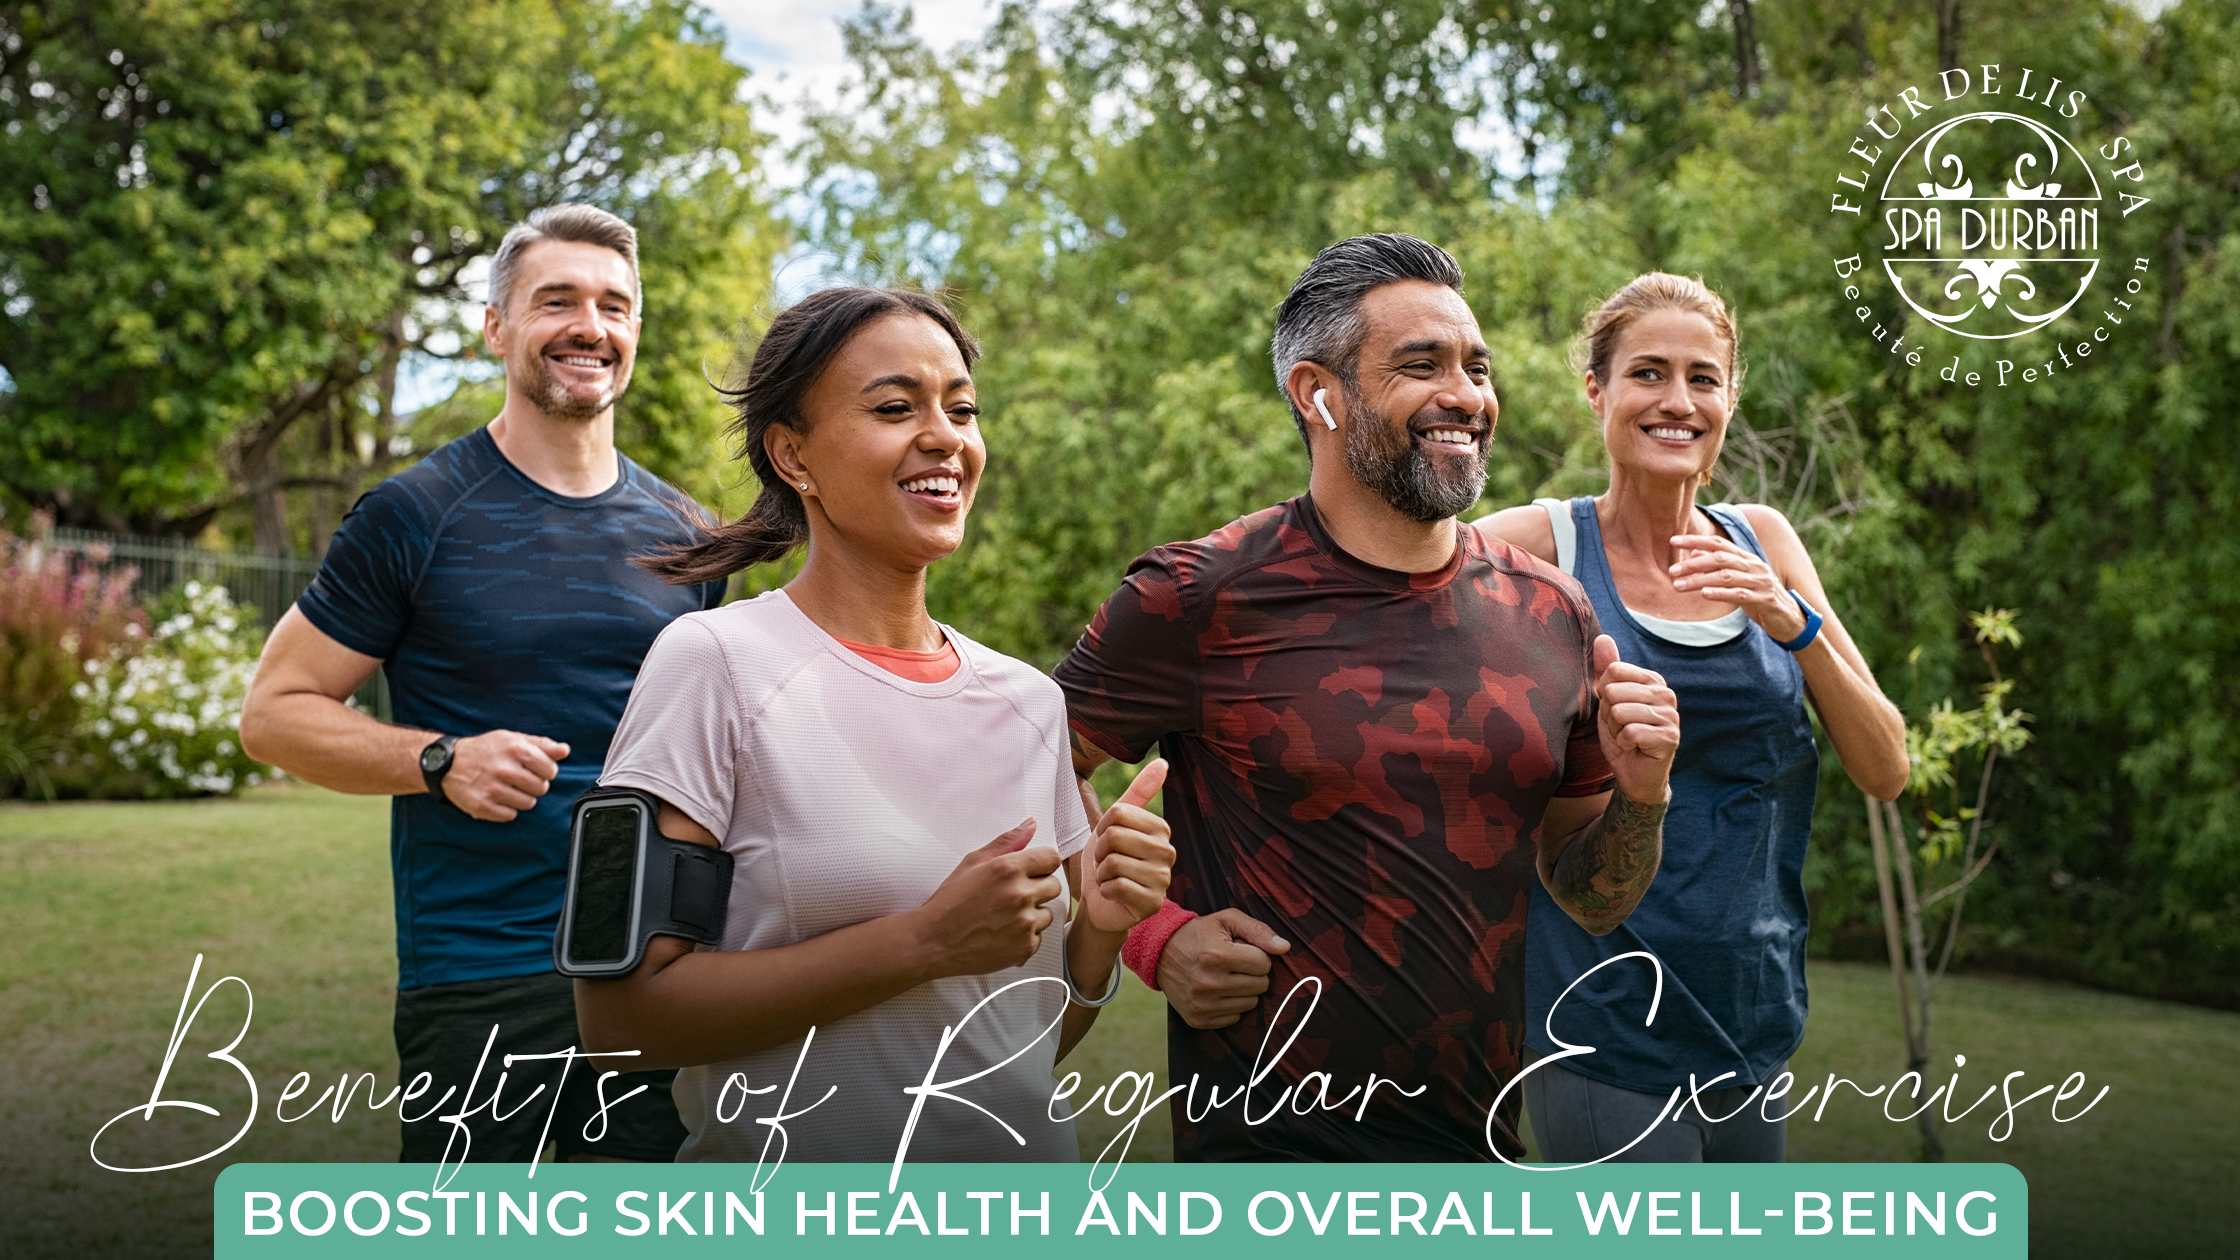 The Benefits of Regular Exercise: Boosting Skin Health and Overall Well-Being